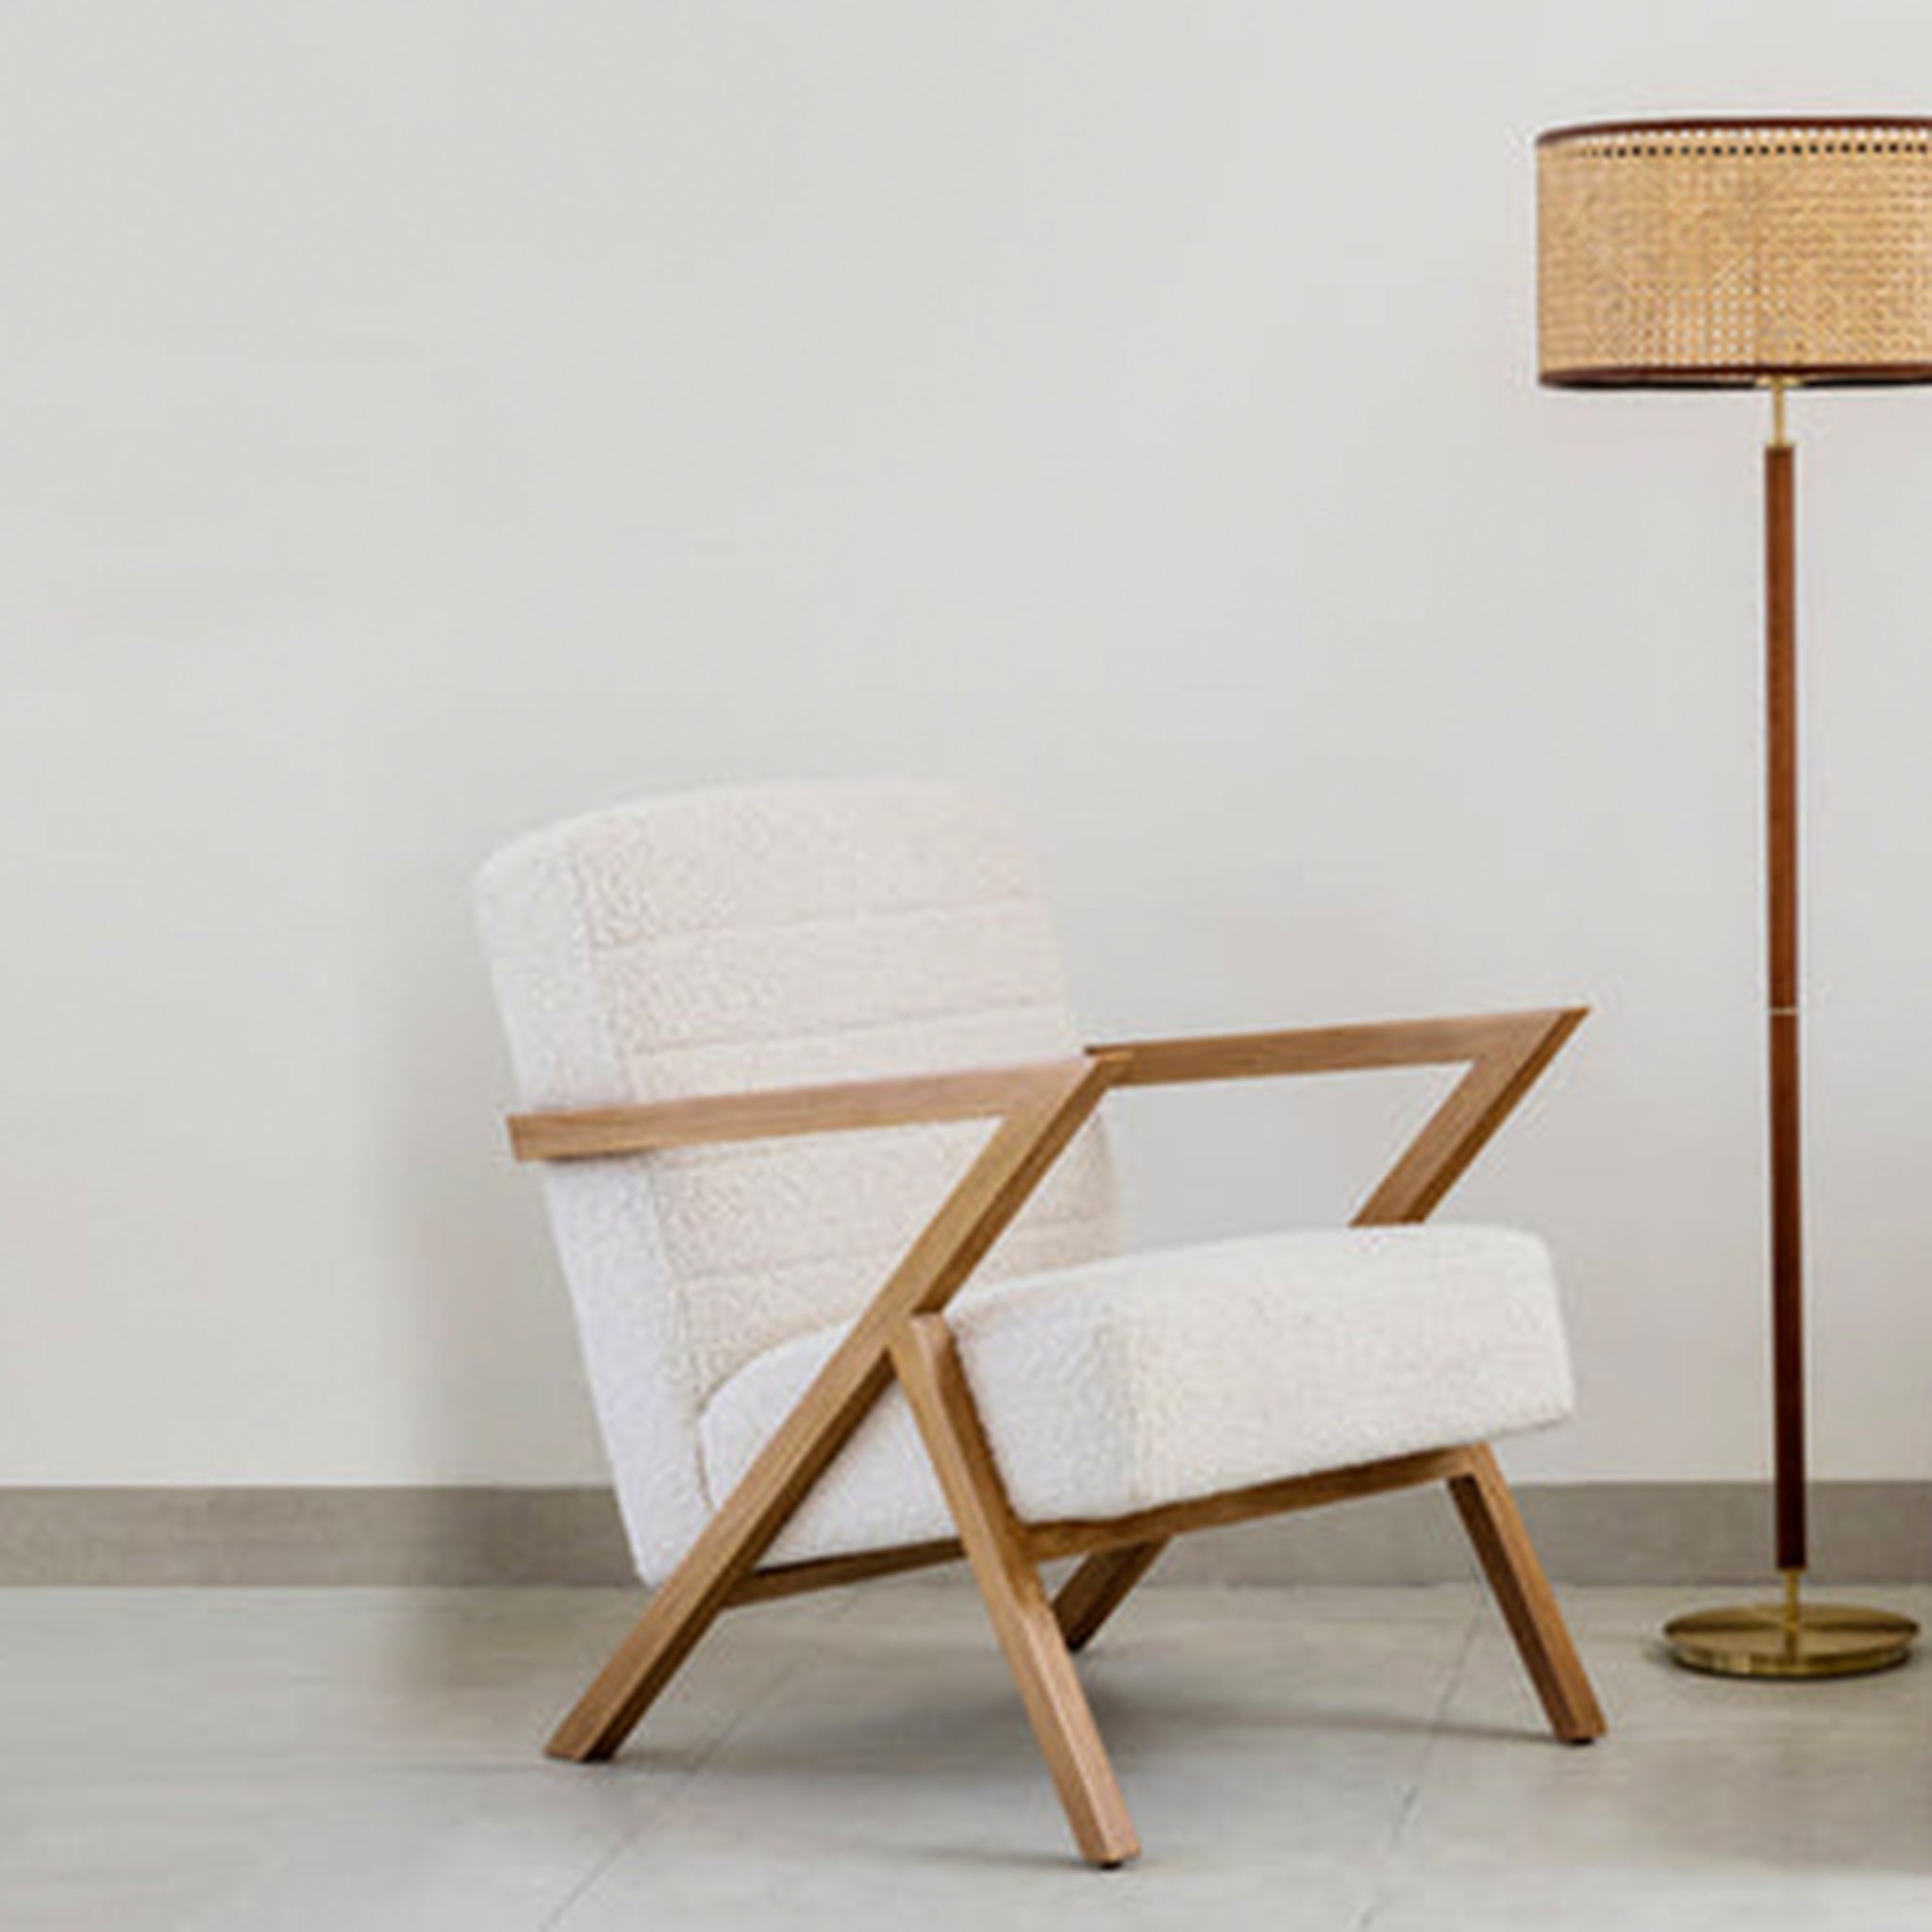 The Stanley accent chair featuring sleek wooden armrests